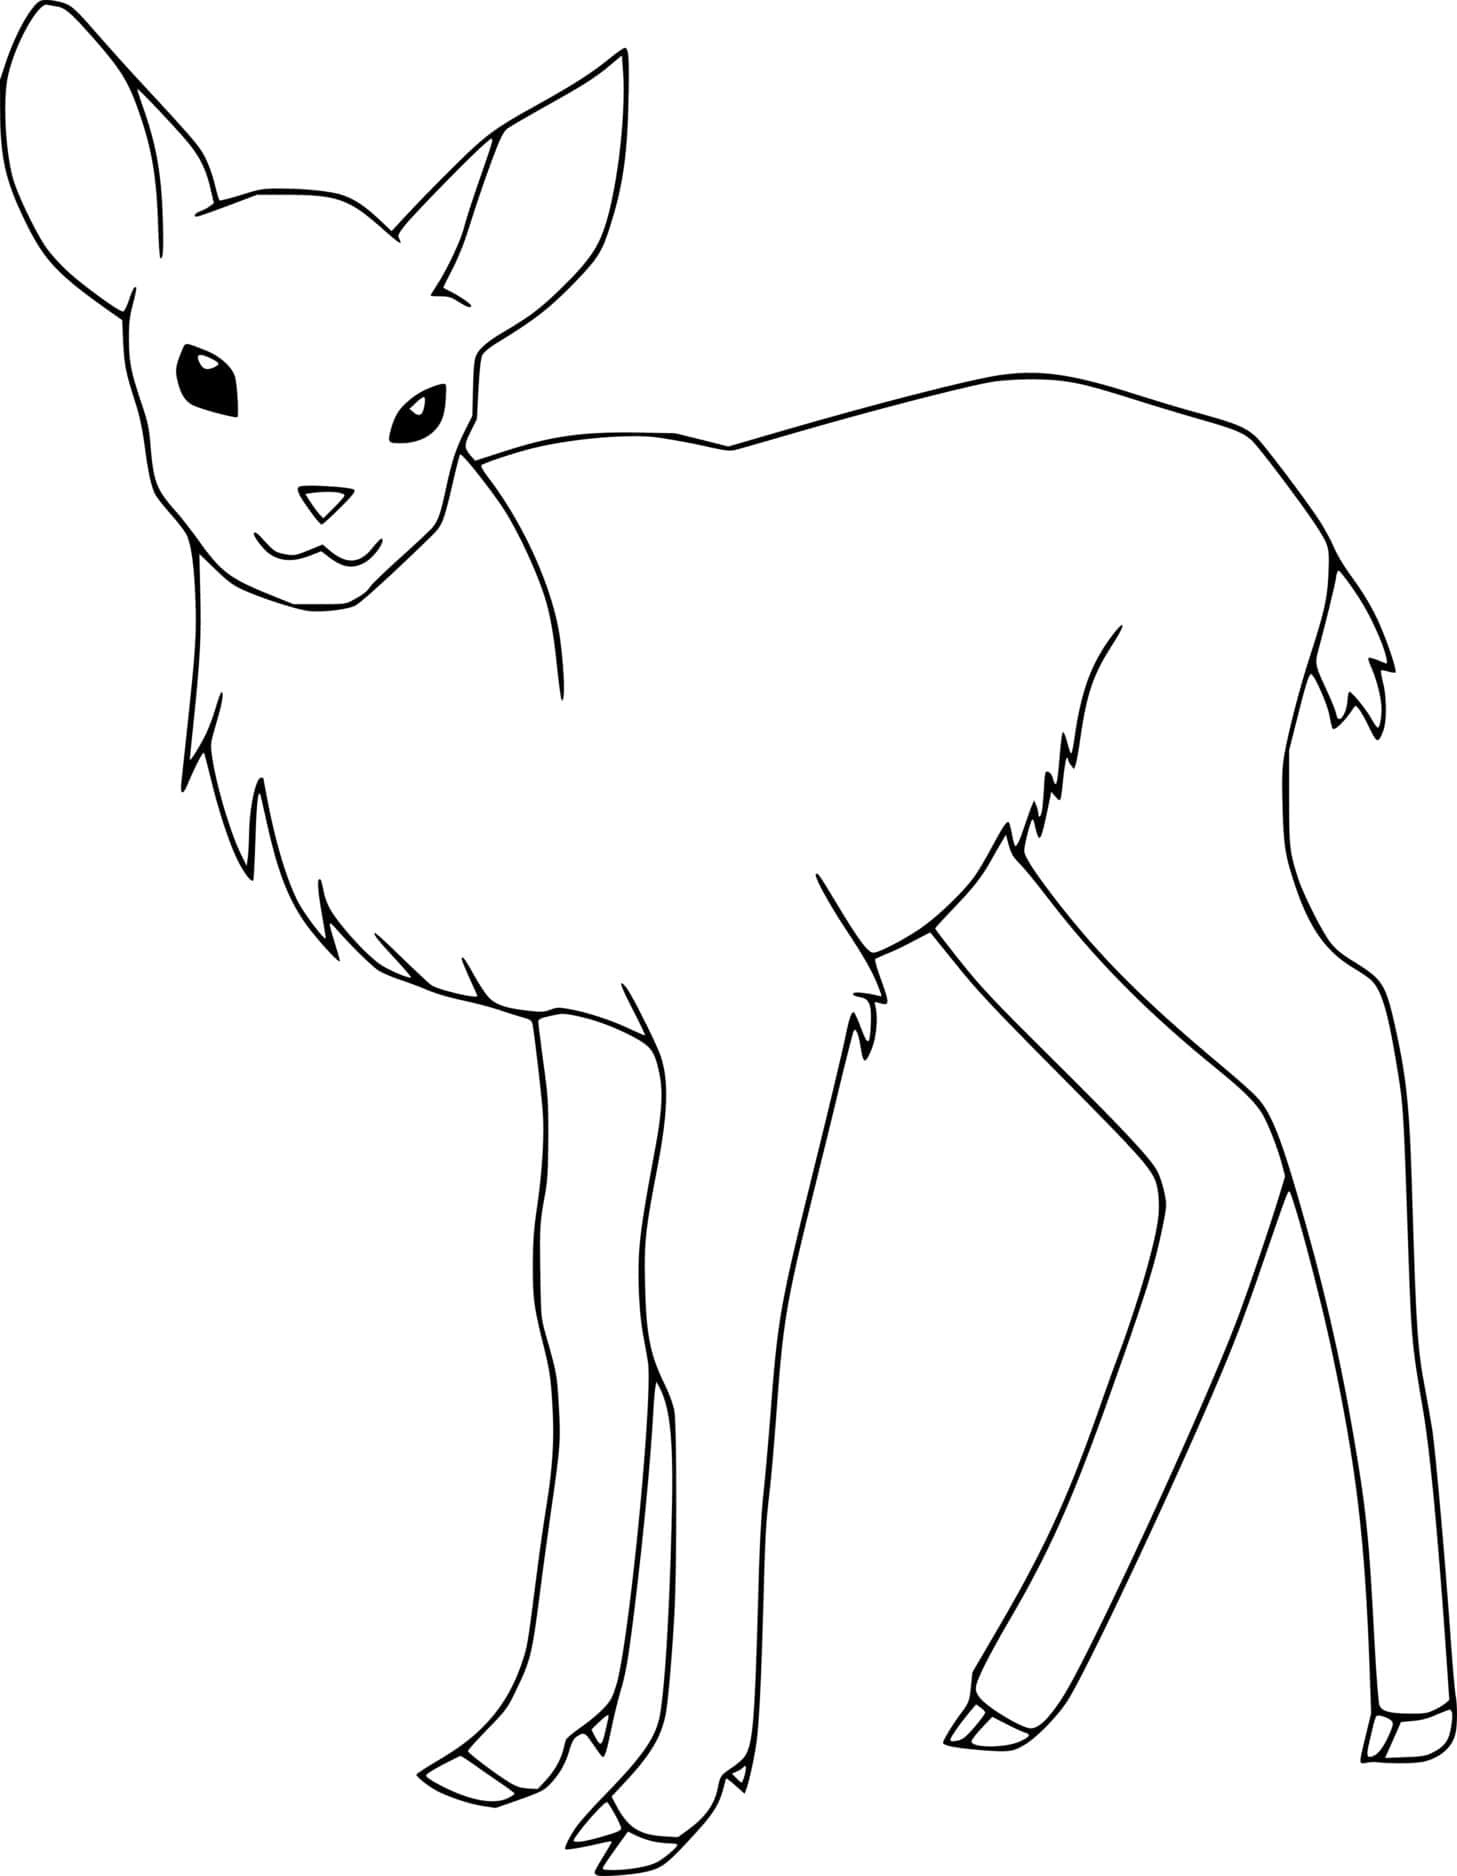 Easy Young Deer Coloring Page